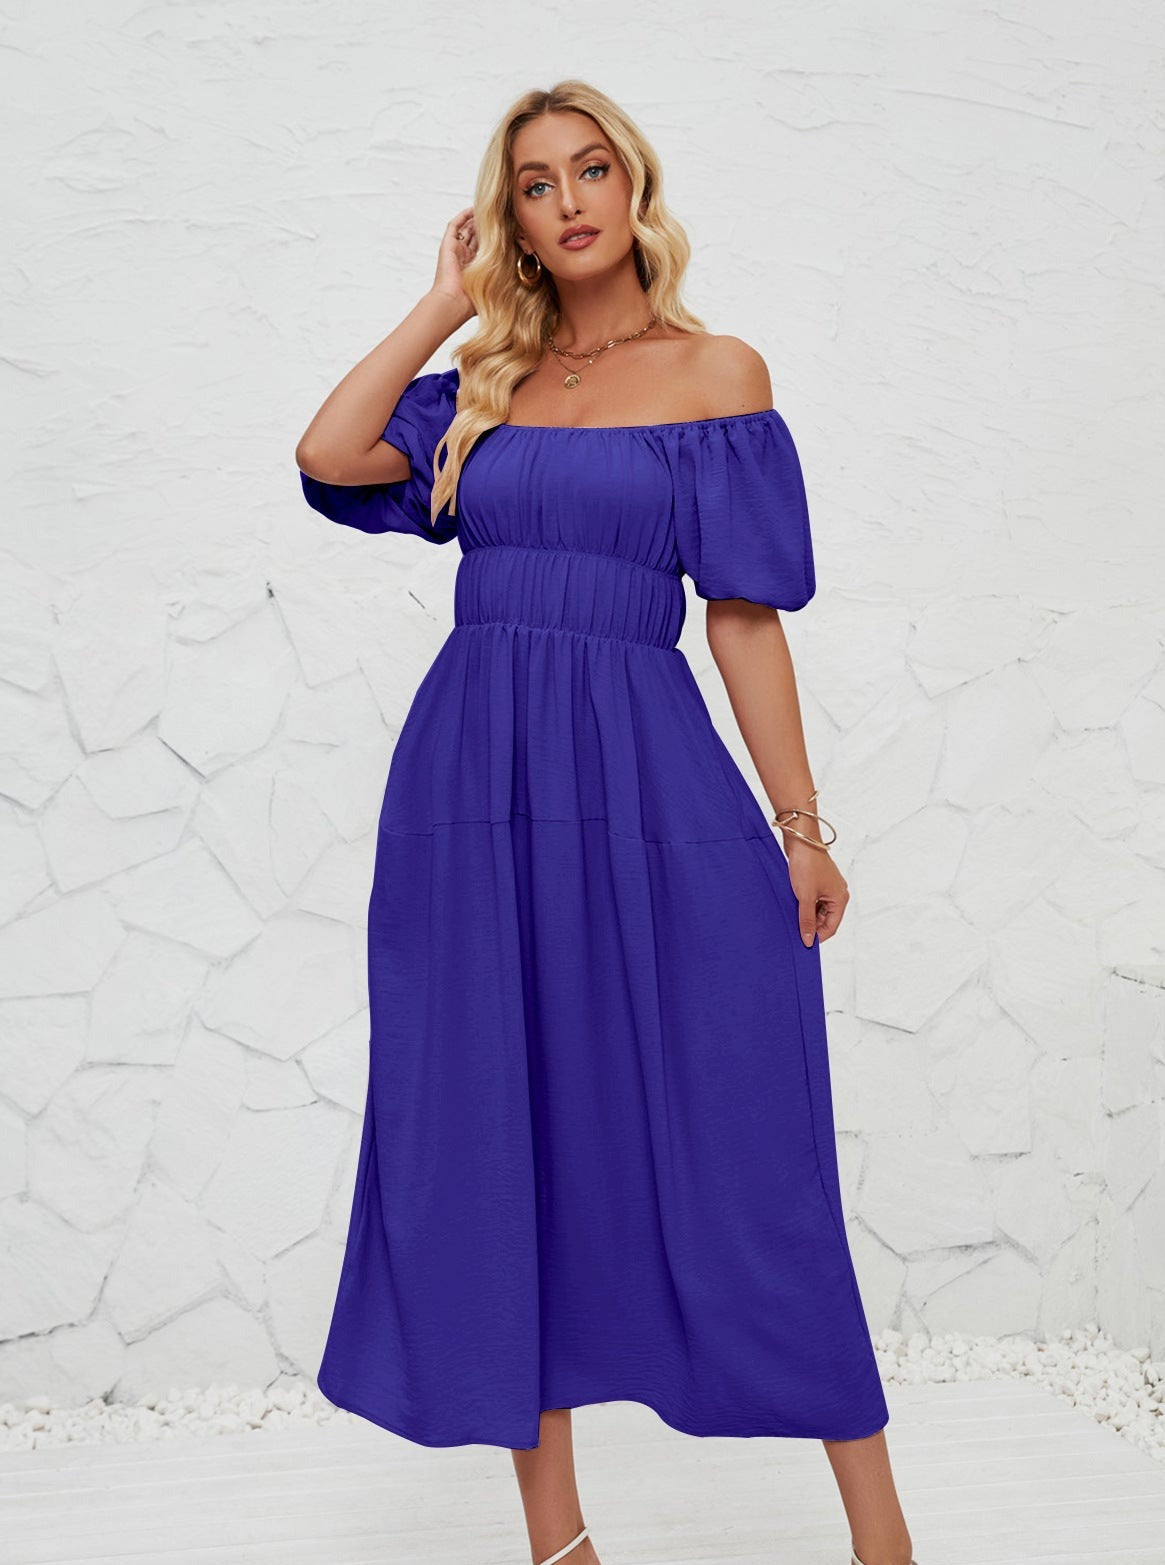 Summer Casual Off Shoulder Bubble Sleeve Pleated Dress